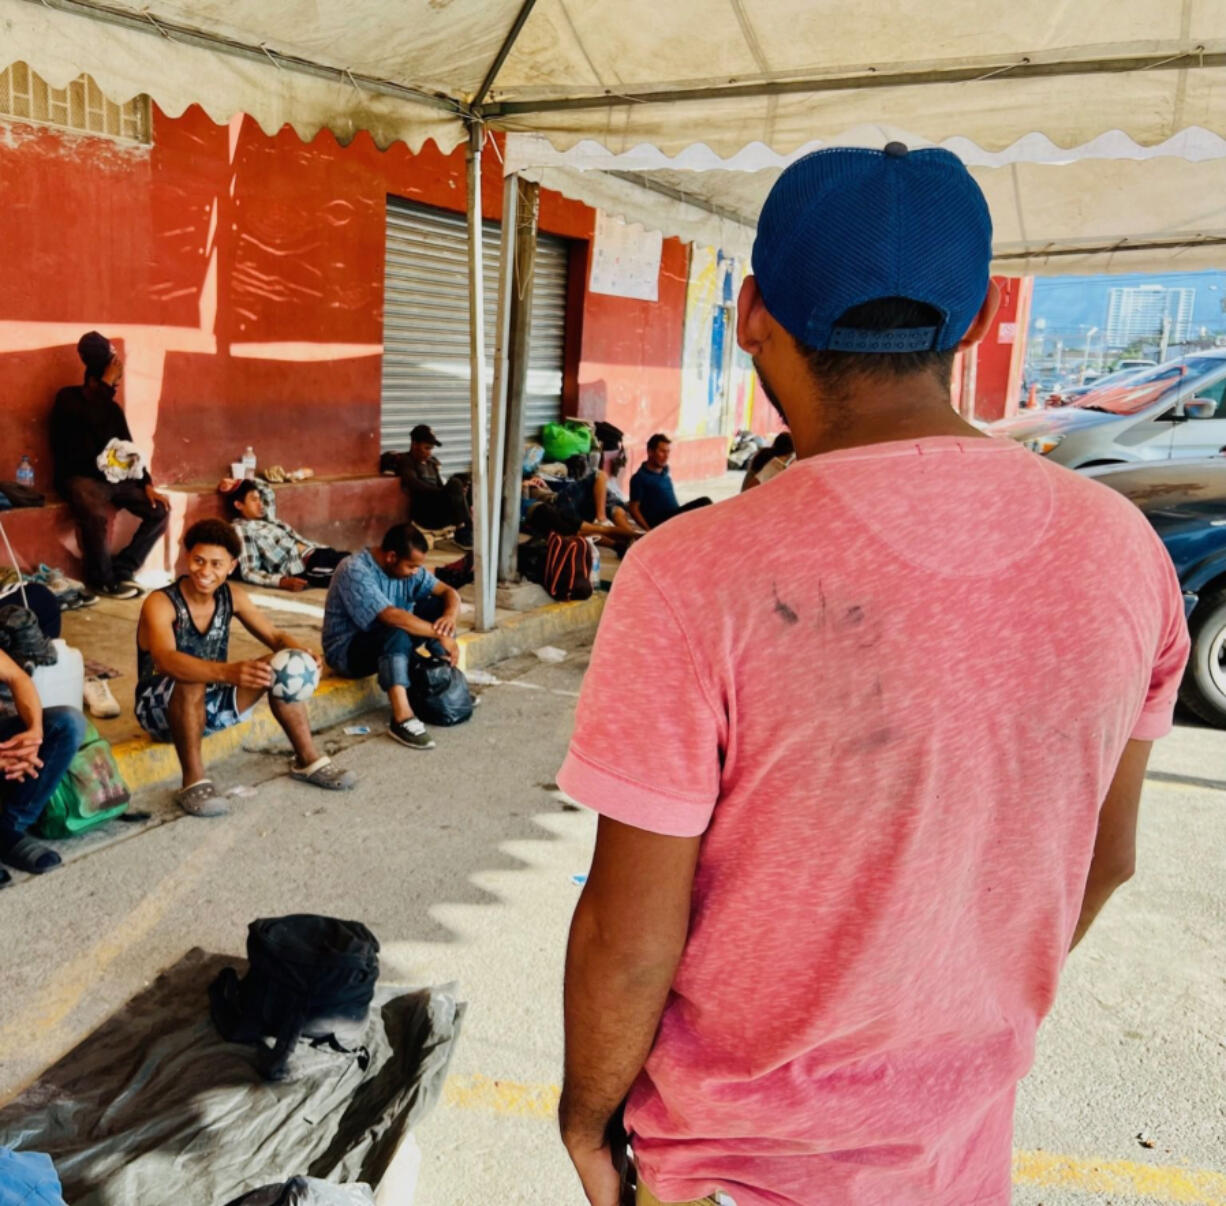 Francisco Cabrera said he was part of a group picked up by state authorities in Coahuila, Mexico, and returned to the state of Nuevo Leon. He's at a shelter in Monterrey, Mexico, waiting for his guide to determine what the next move is to get him to the border. He said he was headed to Dallas.